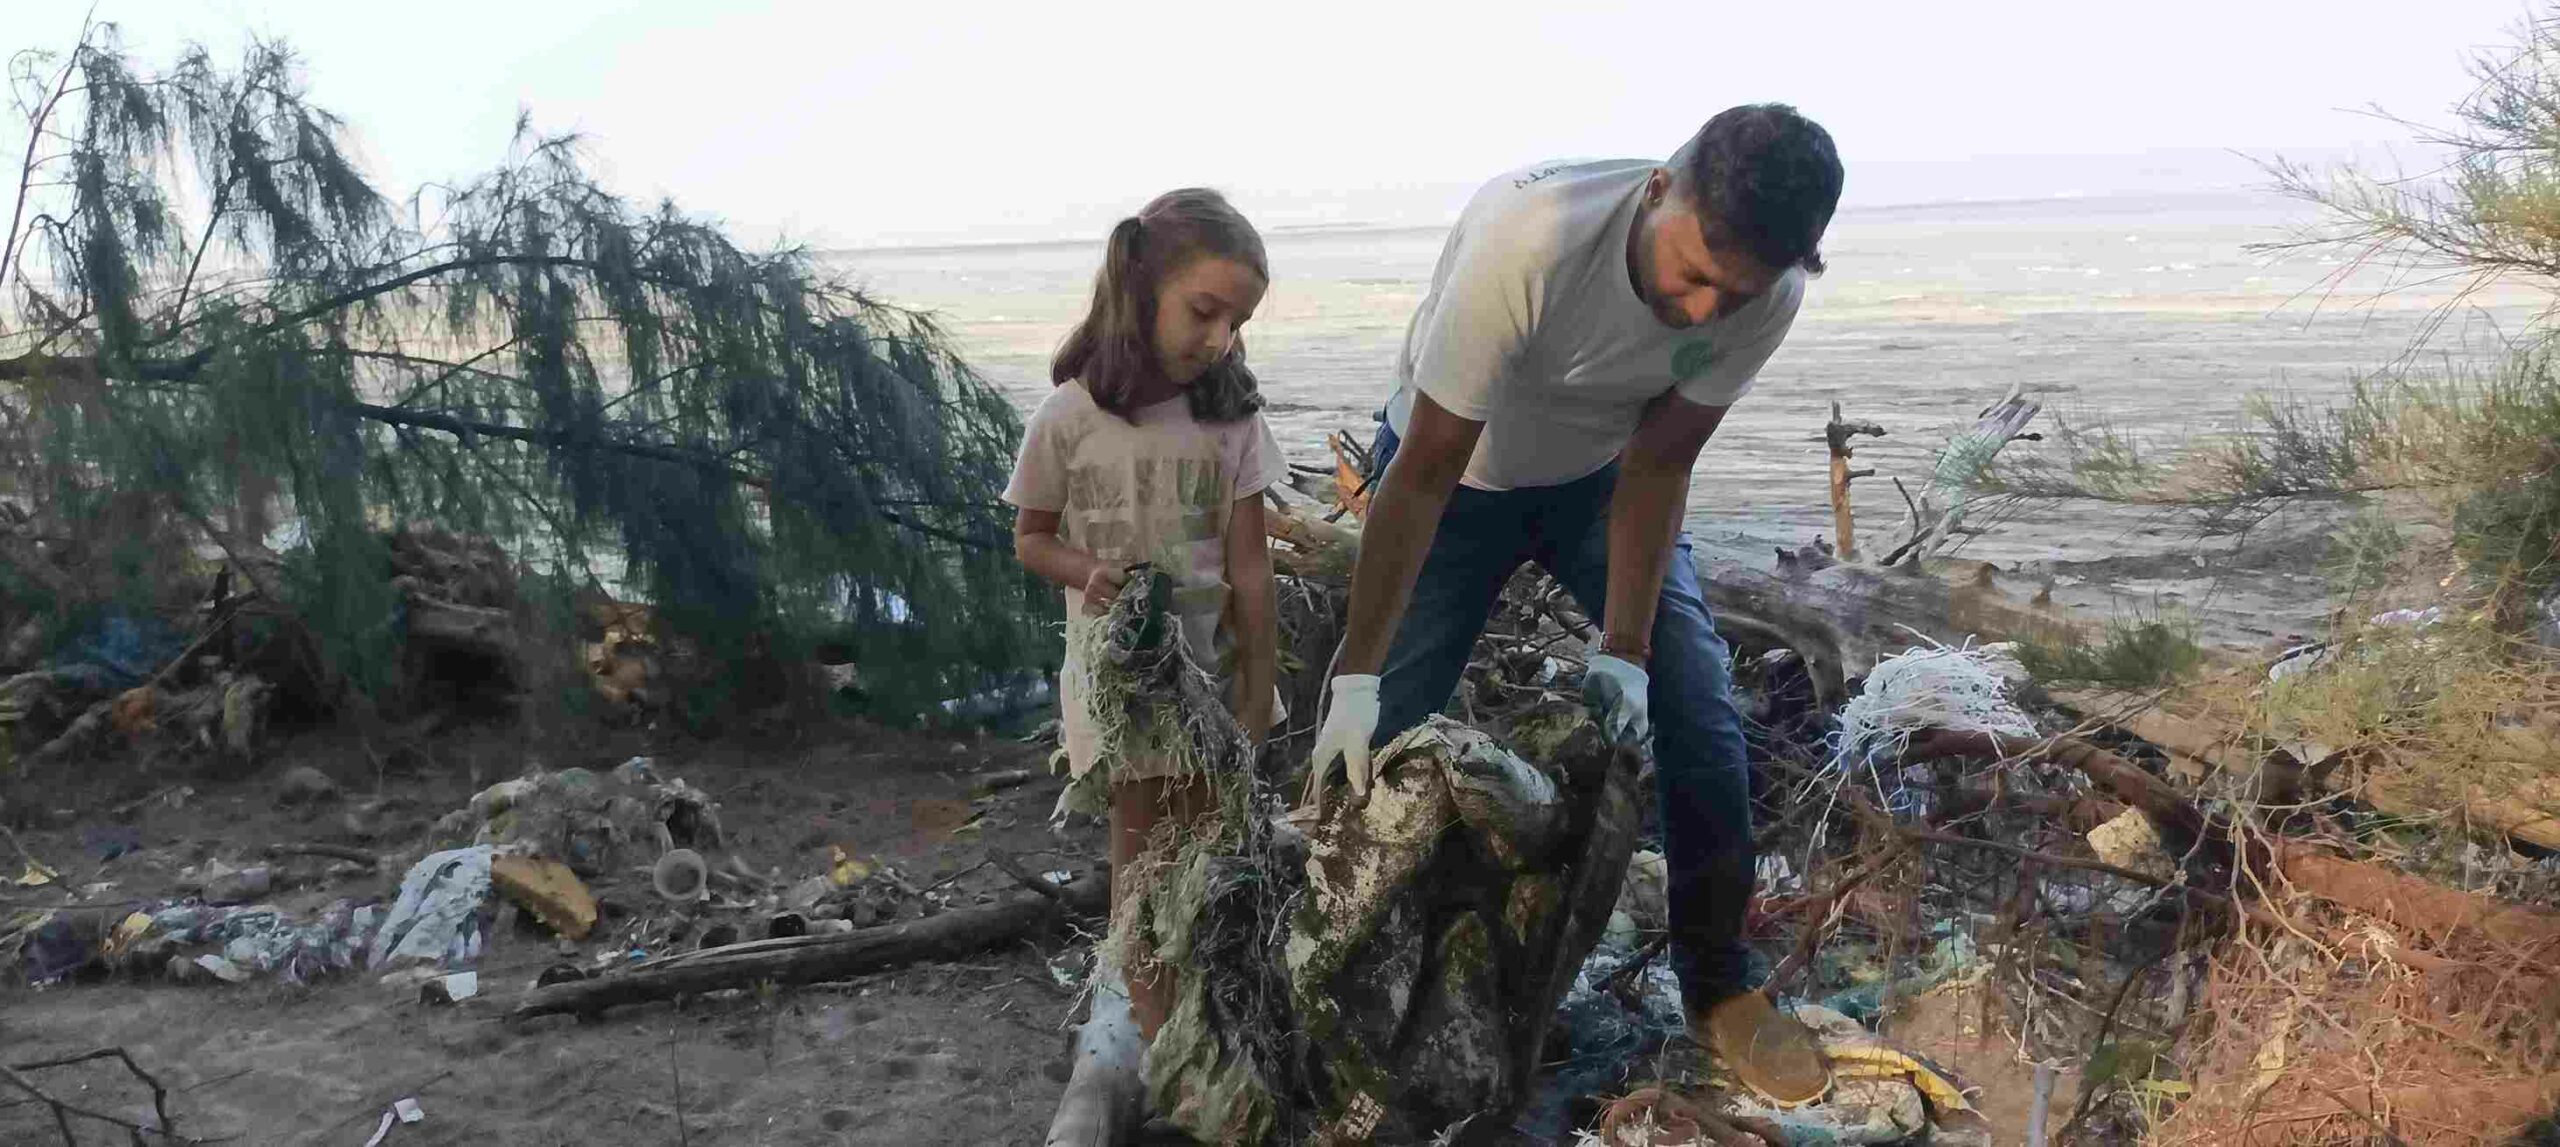 Lisbon Ferrao's 'Vasai Beach Cleaners' is an initiative towards cleaning the beaches of plastic thrash